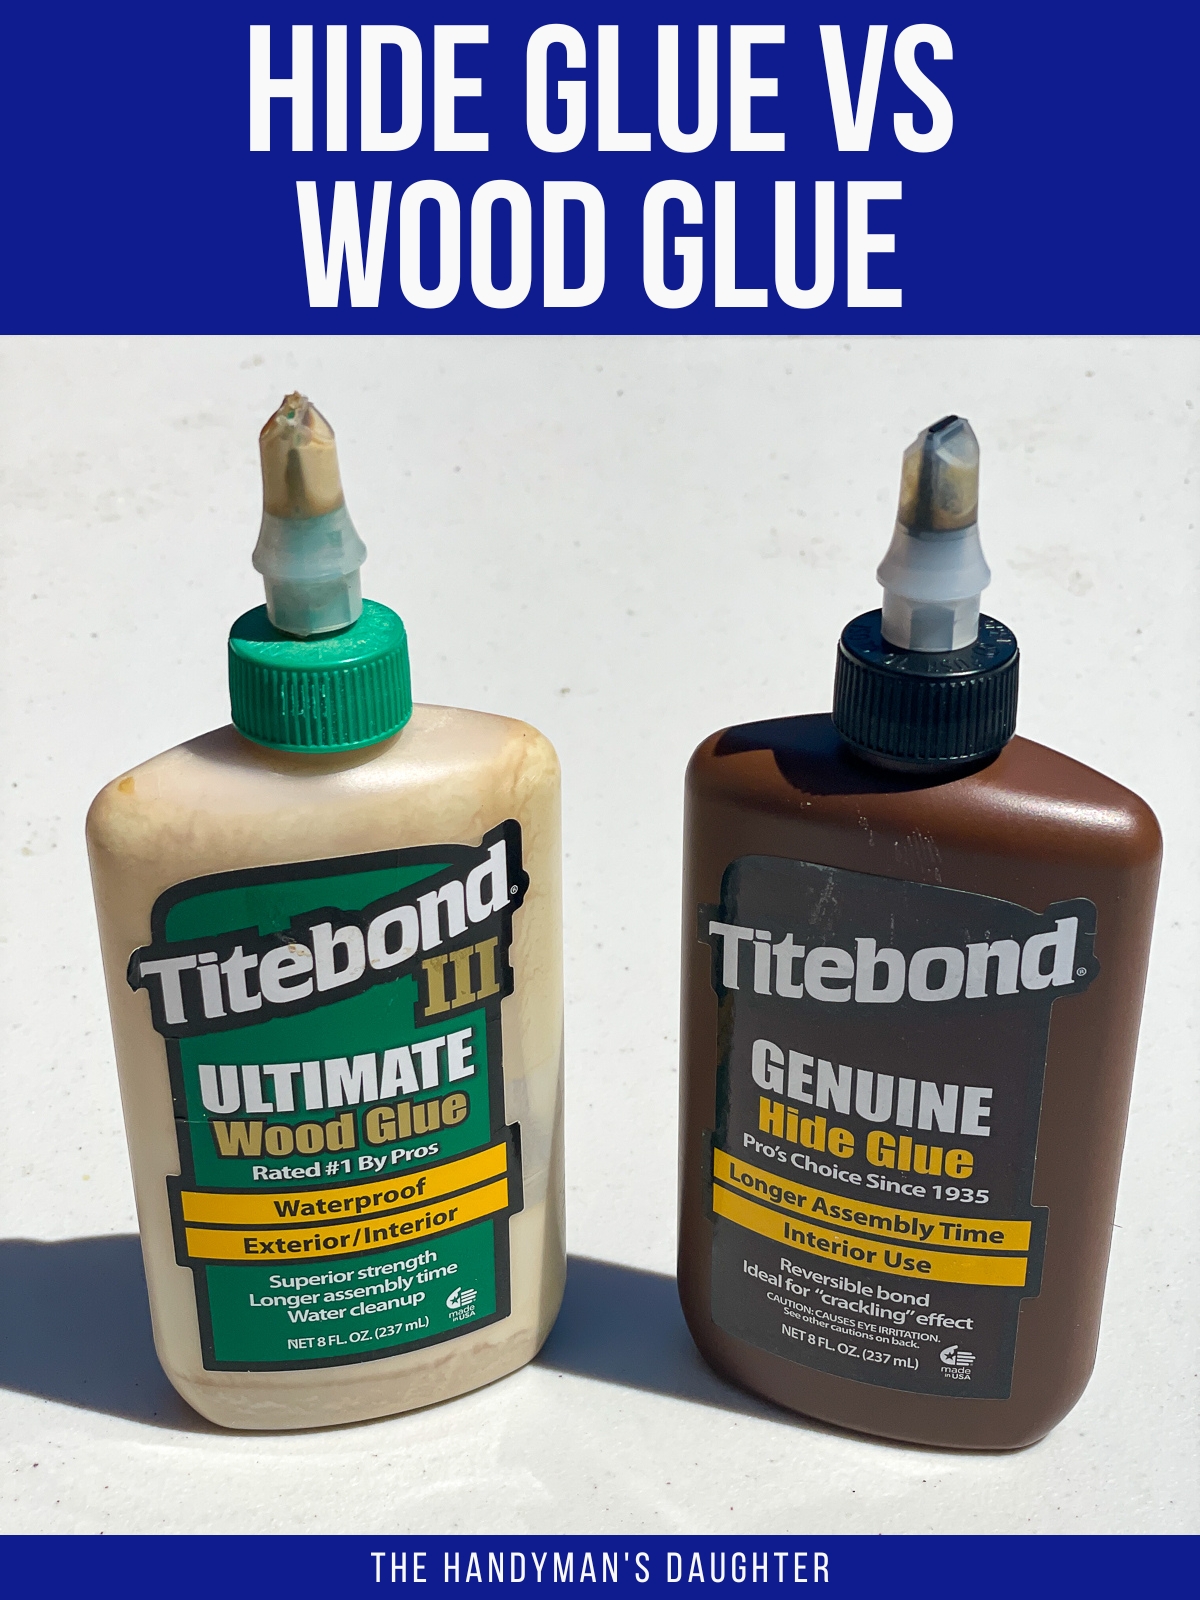 hide glue vs wood glue bottles side by side with text overlay